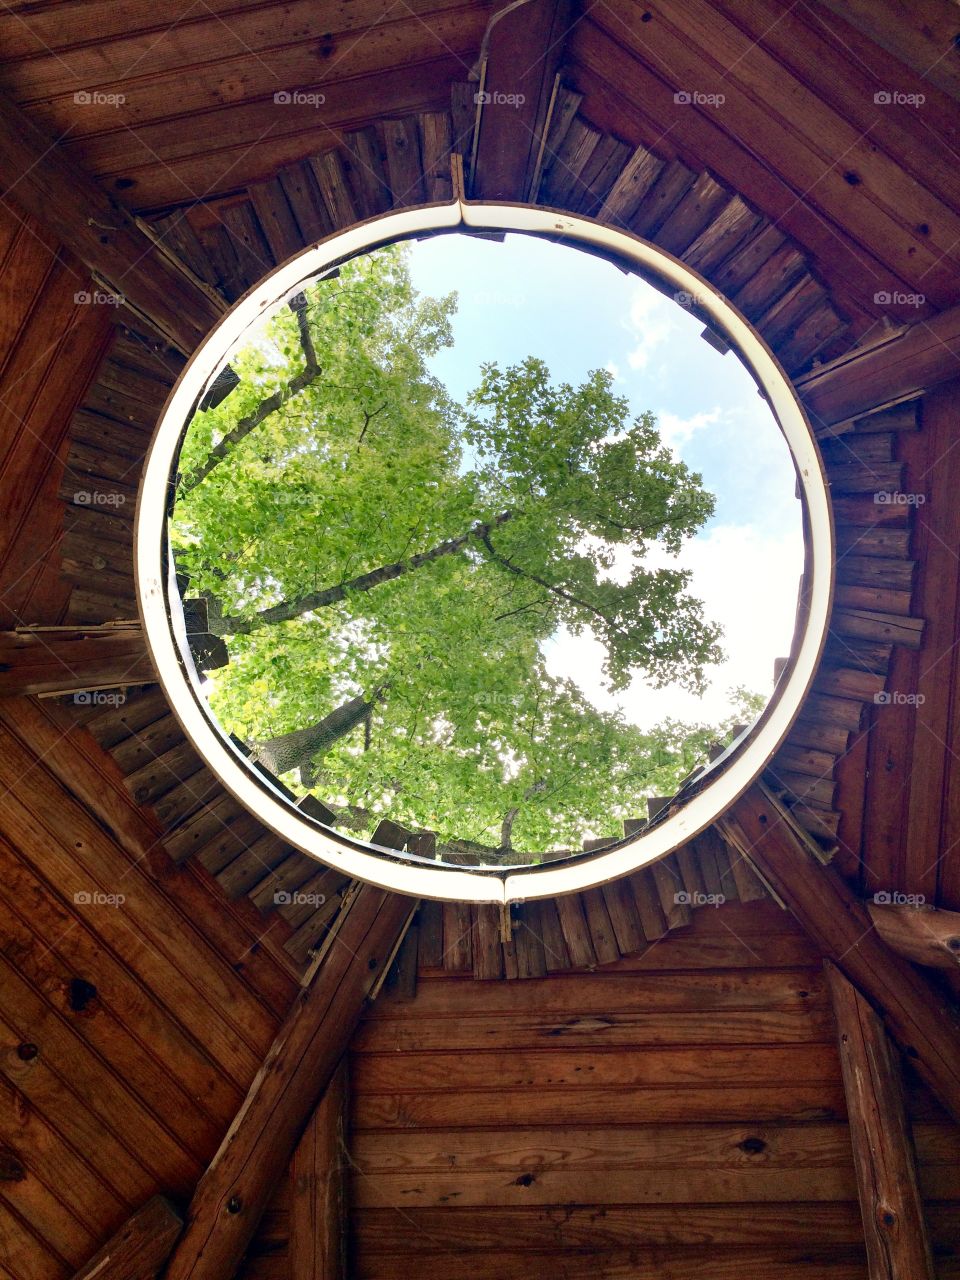 Through the treehouse roof.